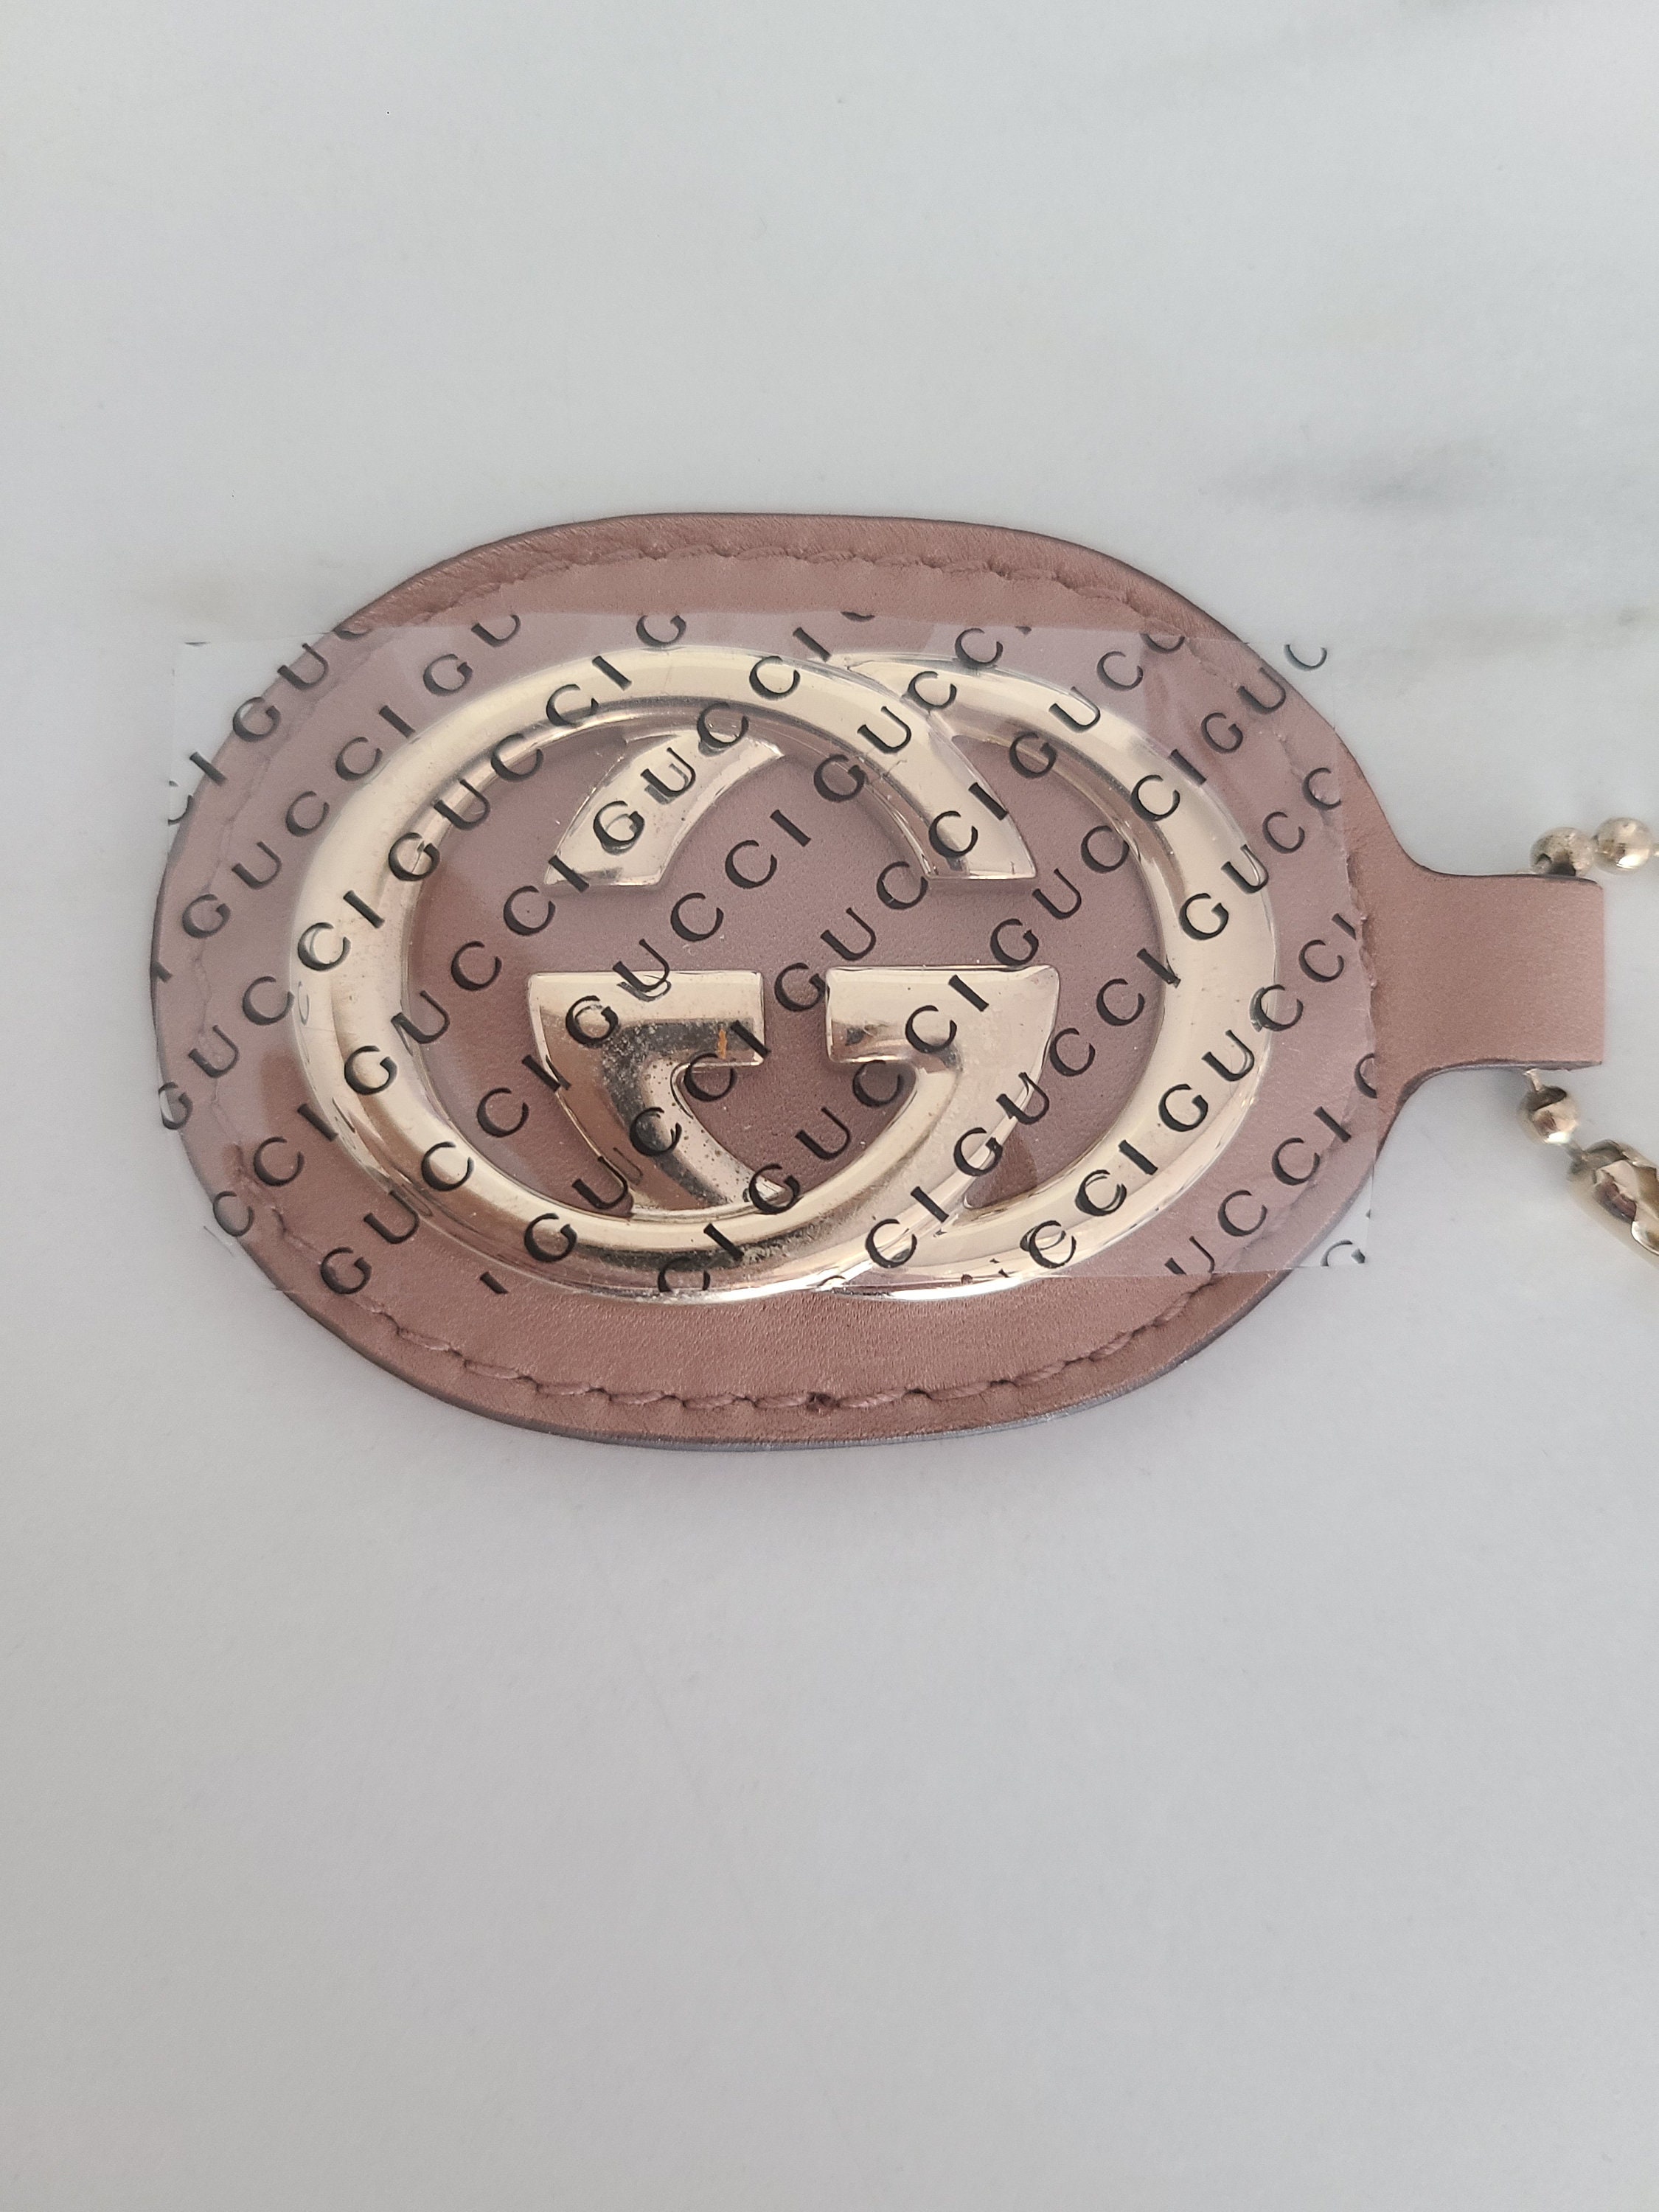 Gucci Keychain Ring Heart & Snake GG Leather Red Gold Bag Charm Keyring Key